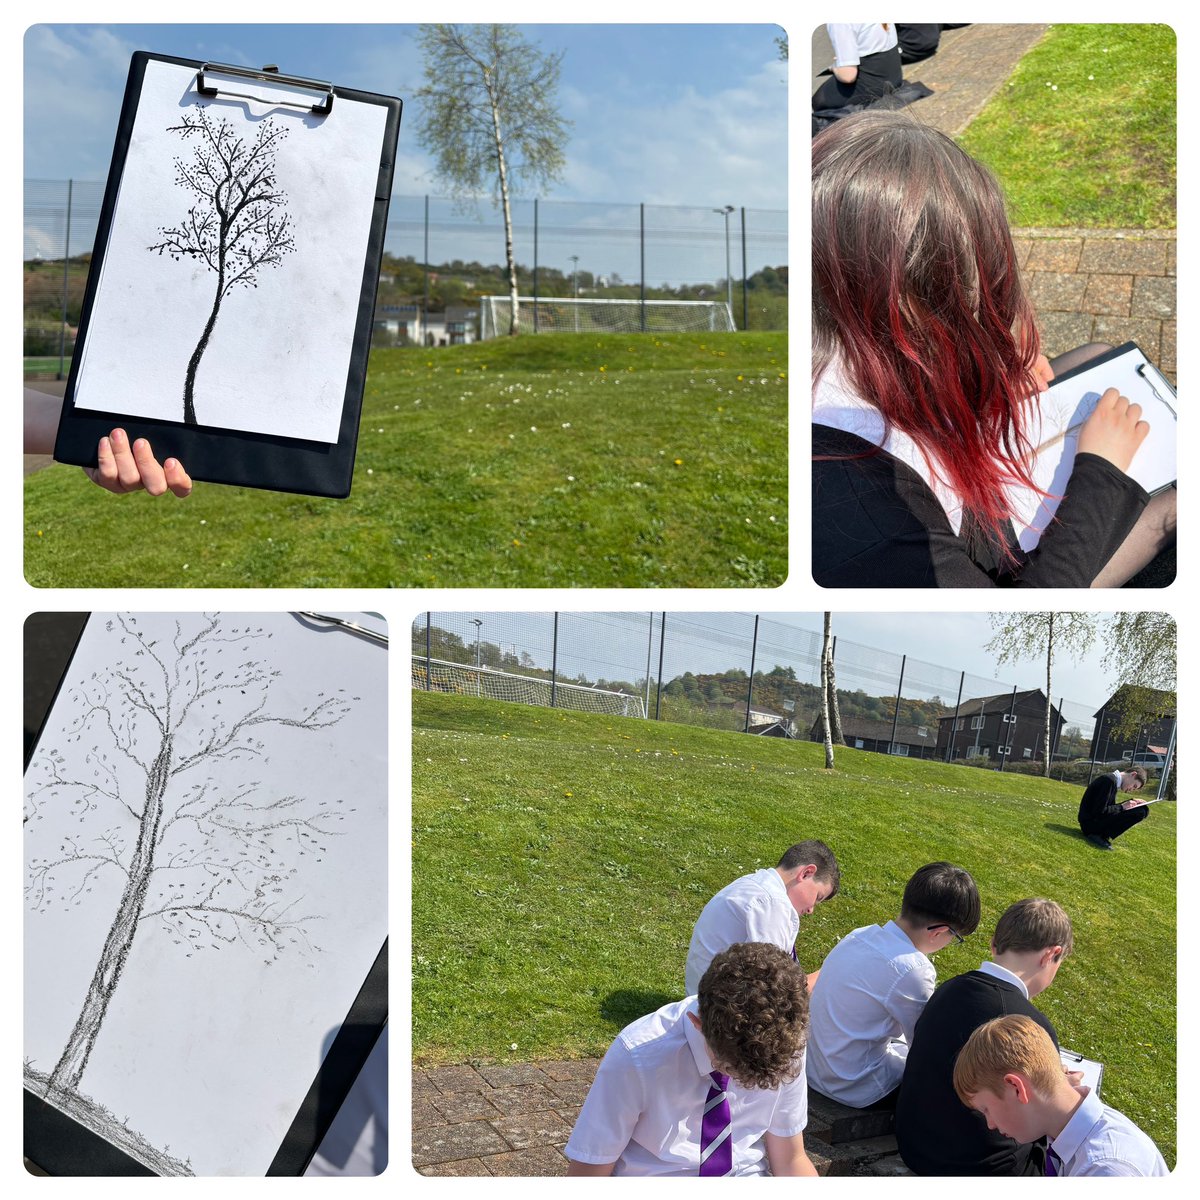 Great to be sketching en plein air in the sun yesterday. S1 drawing trees for their Henri Rousseau inspired jungle landscape compositions. @clydeview_a